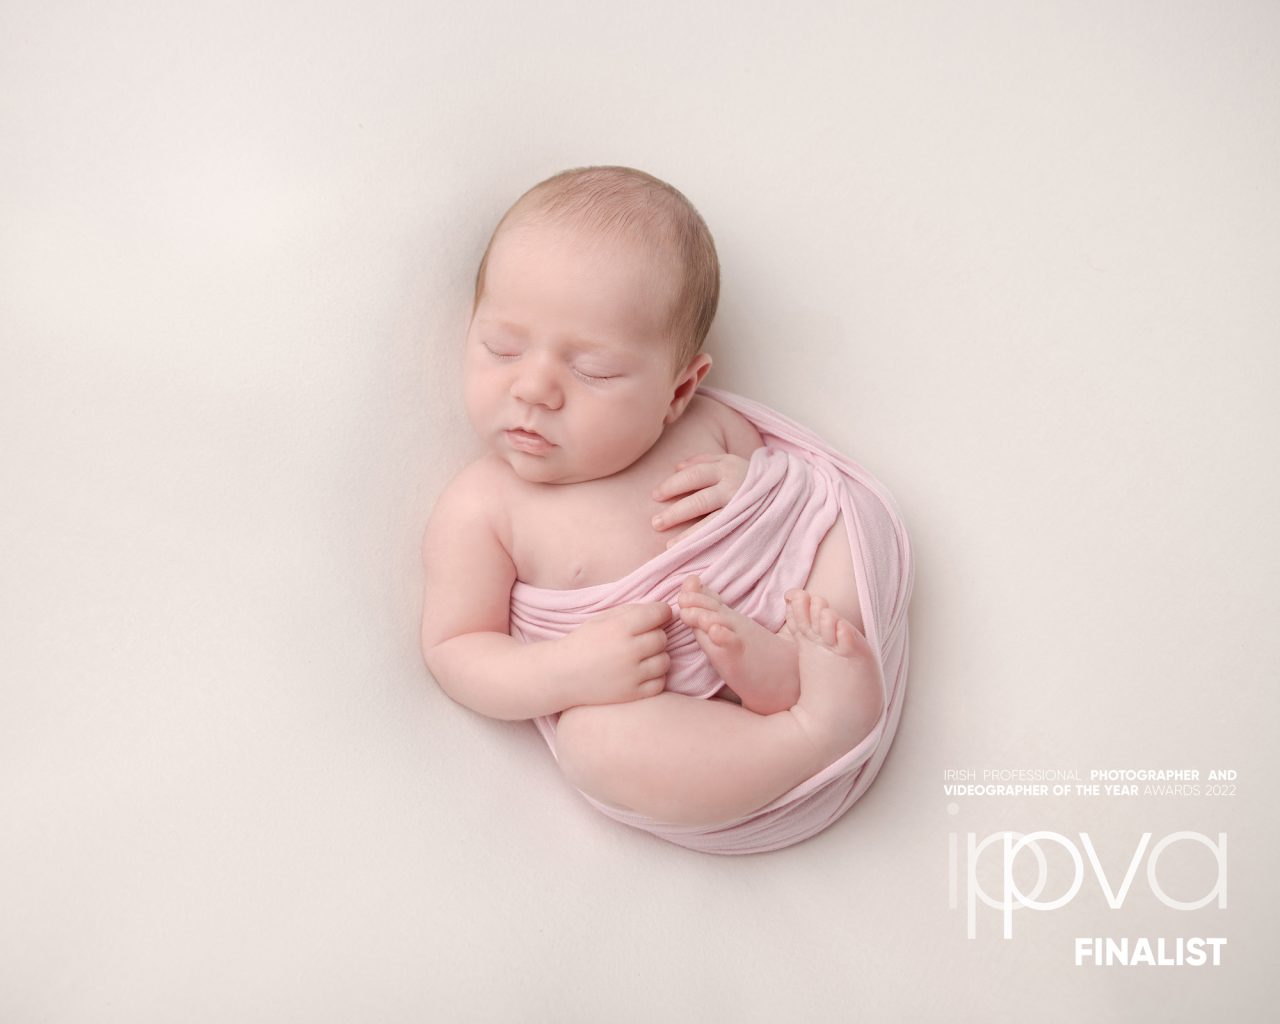 Award-Winning Photograph in the Newborn Category by Sheena Griffin.